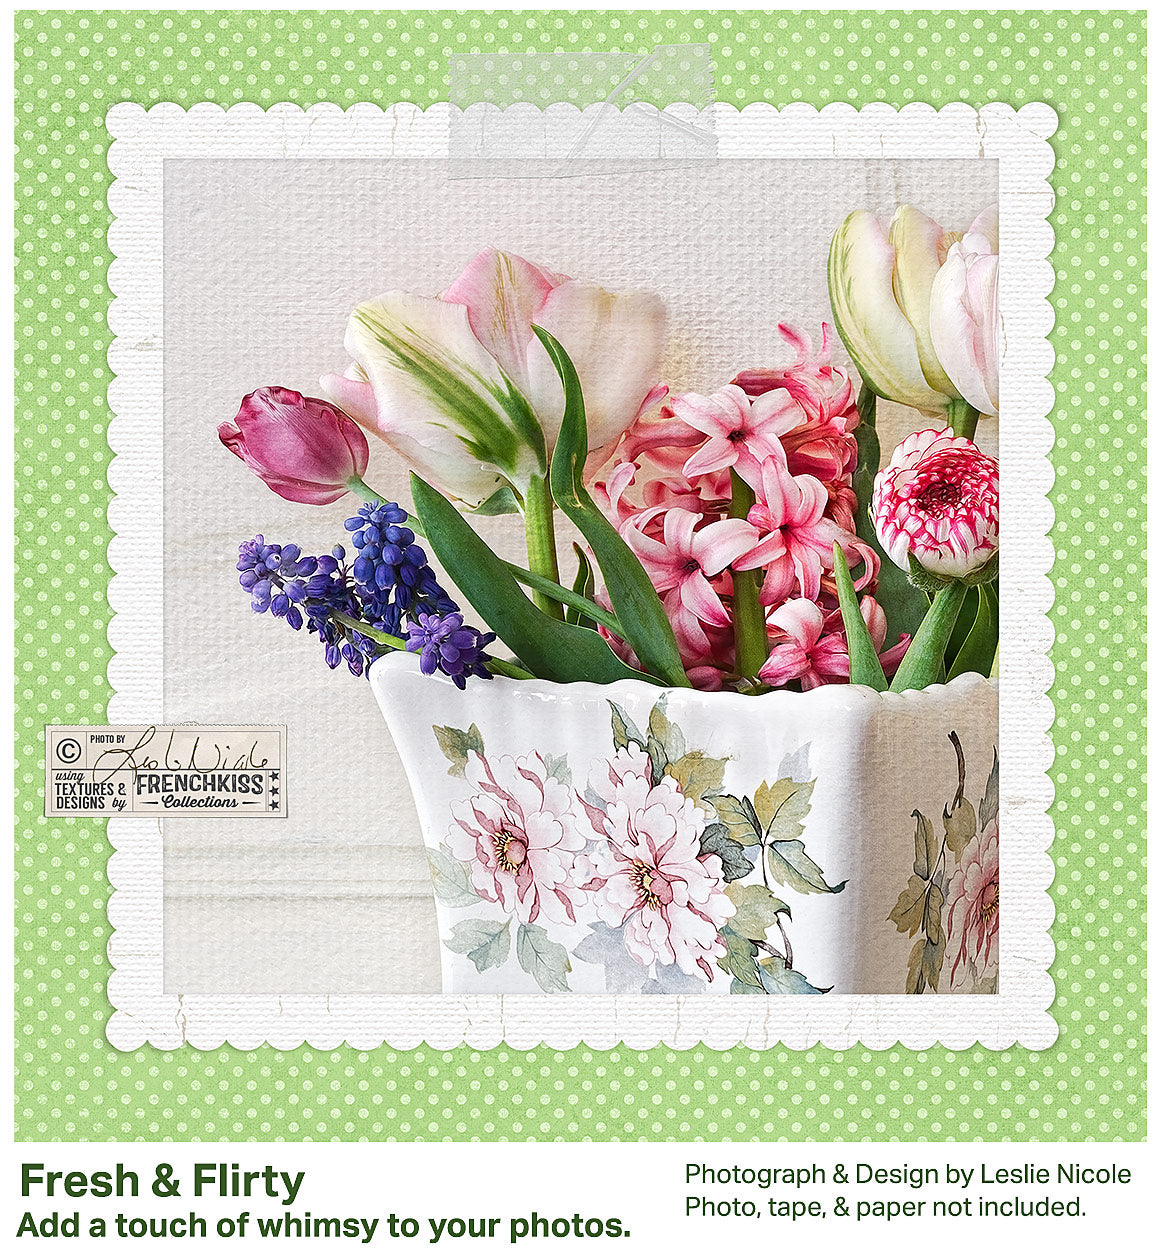 Fine Art Floral Photograph using a digital frame with scalloped edges.